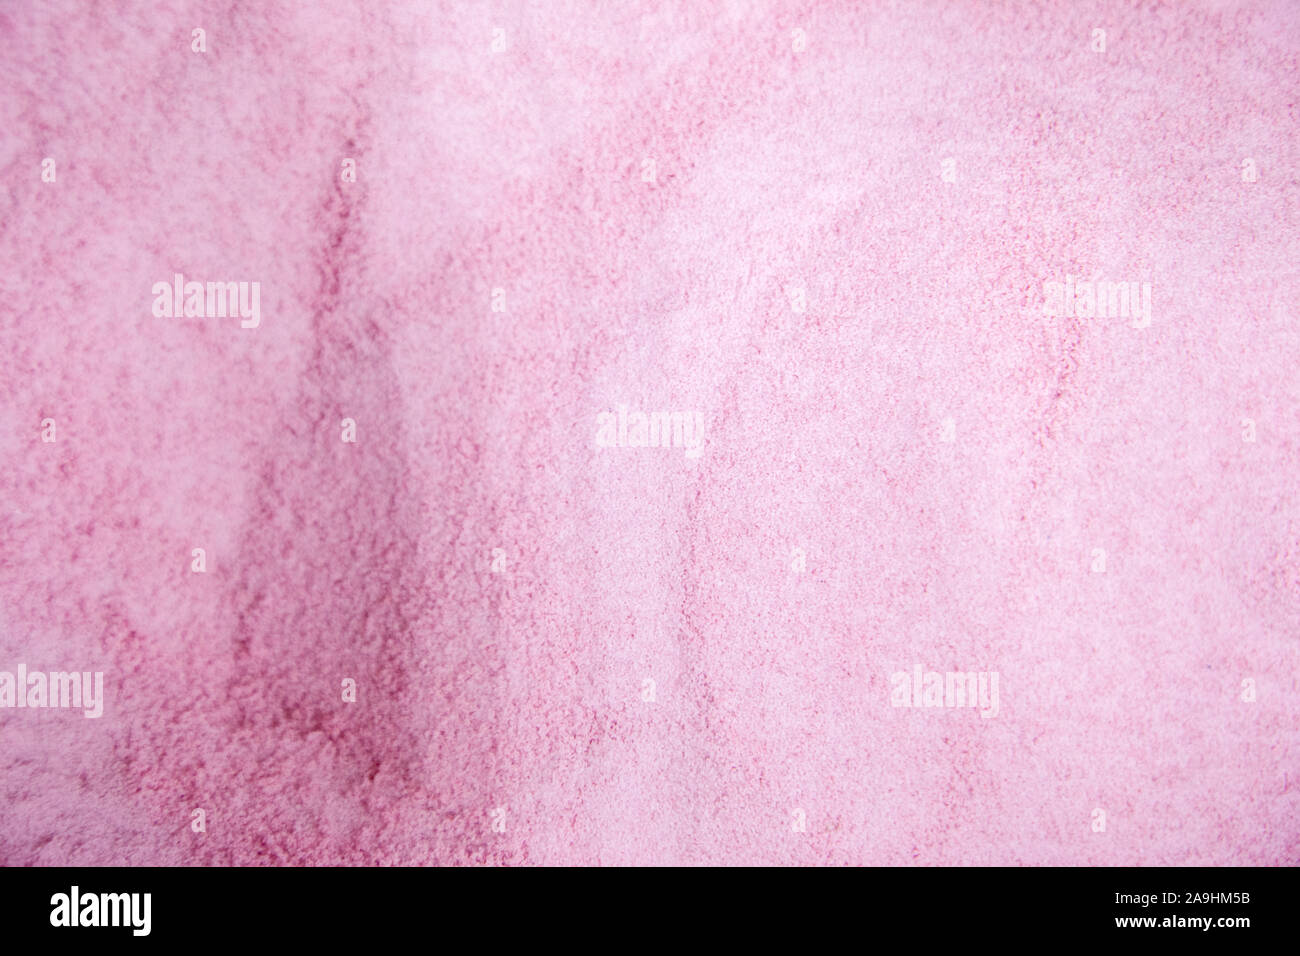 raspberry or pink flavored drink crystal mix Stock Photo